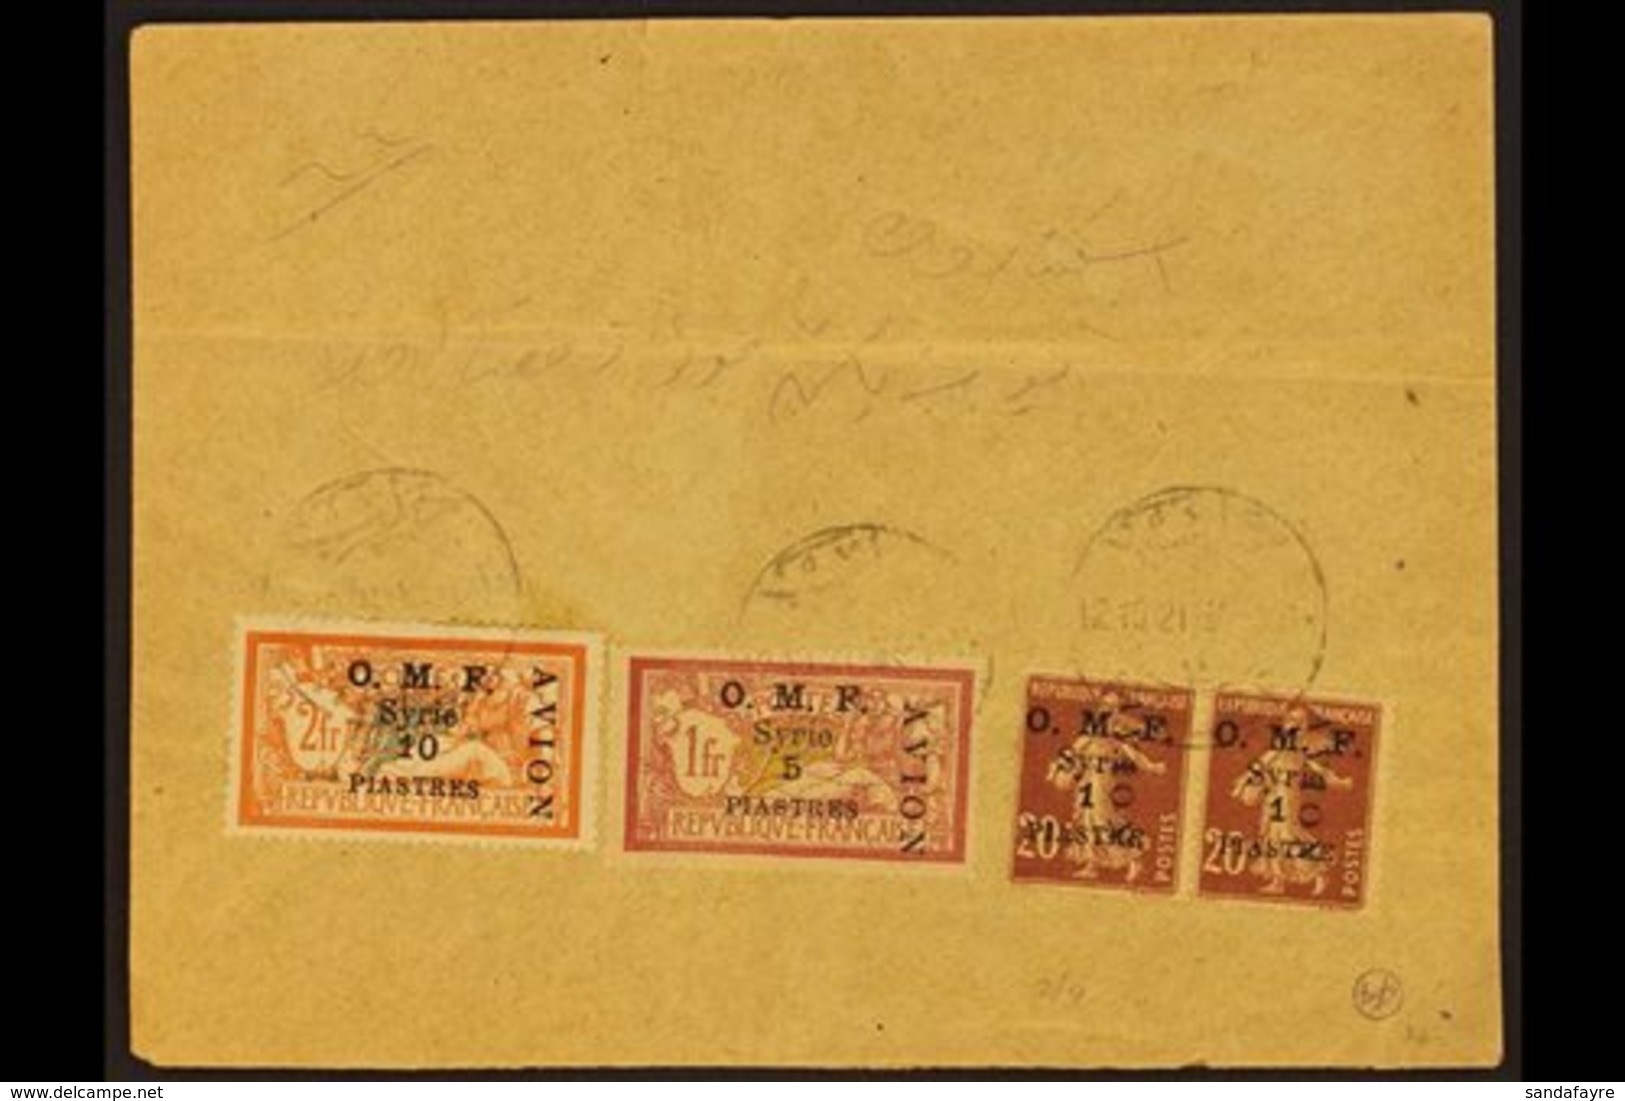 1921  Airmail Set Complete On Flown Cover Halep To Damas, SG 86/9, Cover Fold But Stamps Very Fine. For More Images, Ple - Syrien